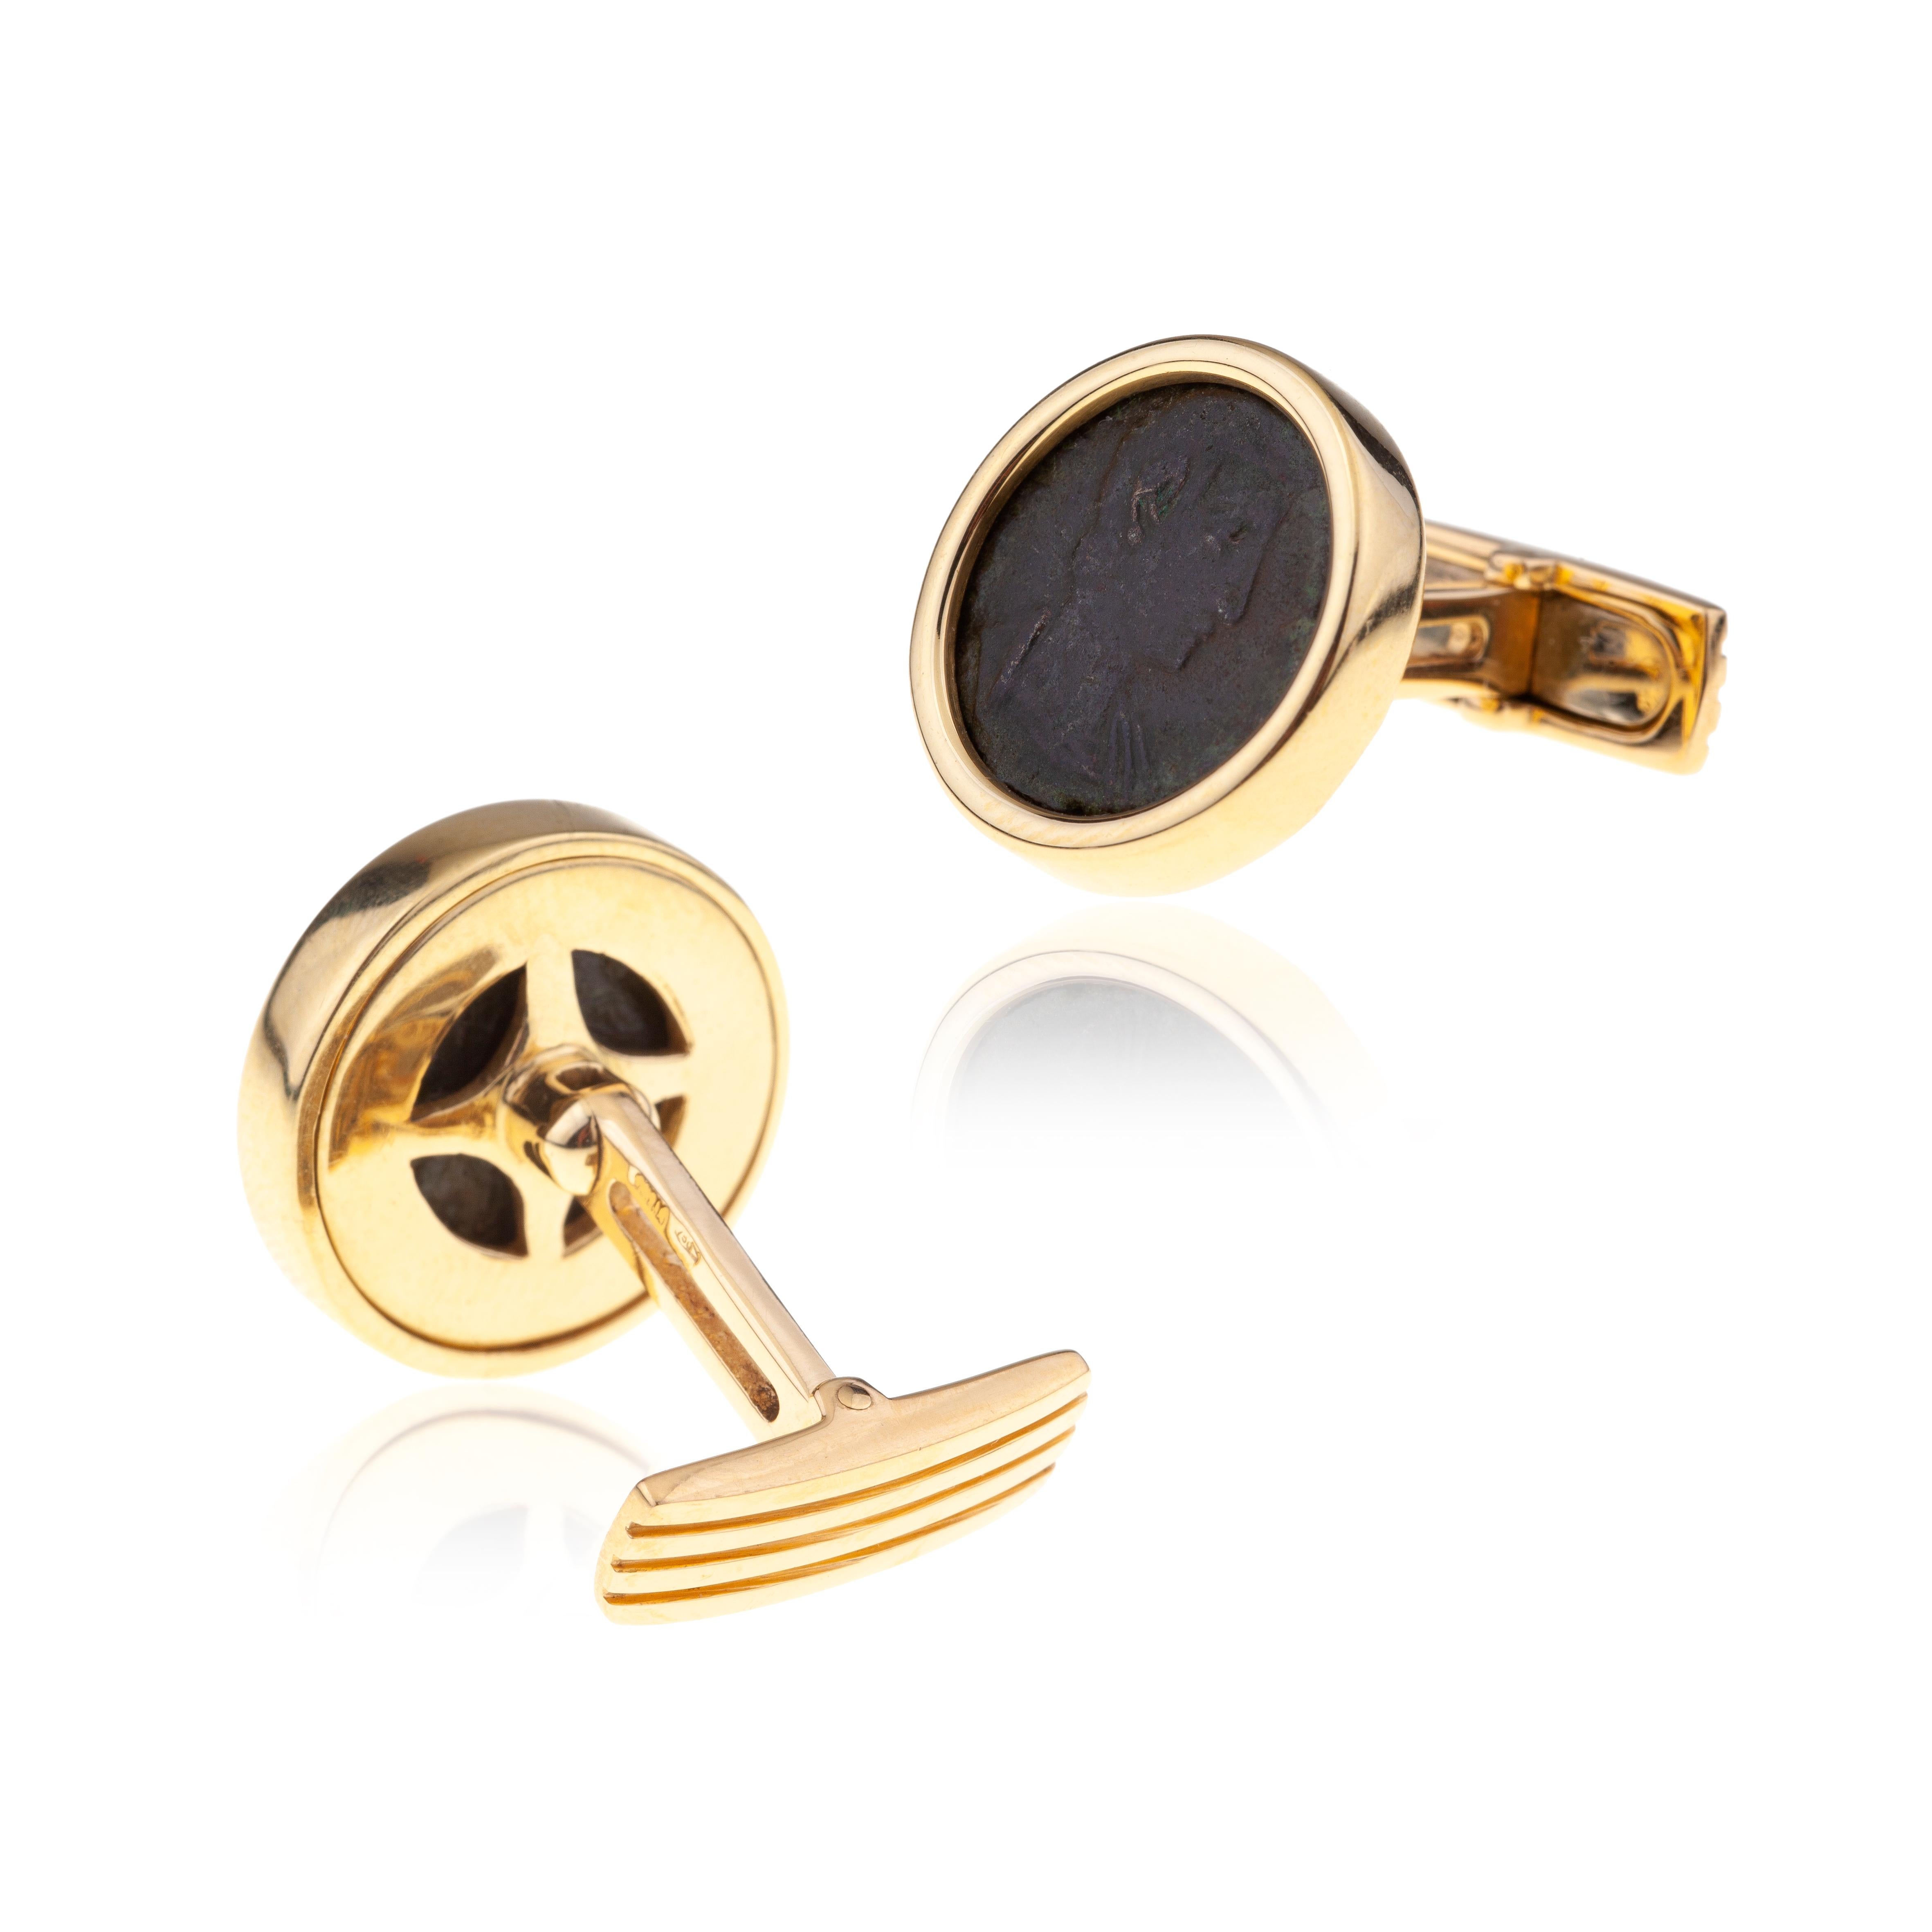 Cufflinks Round 18kt Gold with Roman Coins.
Cufflinks for Men for Business or Leisure Time to be worn on any Cuff of both Elegant and Casual Shirt.
The coin is set on gold and the weight of 18kt gold is around 15.50 grams. 
Angeletti Boasts an